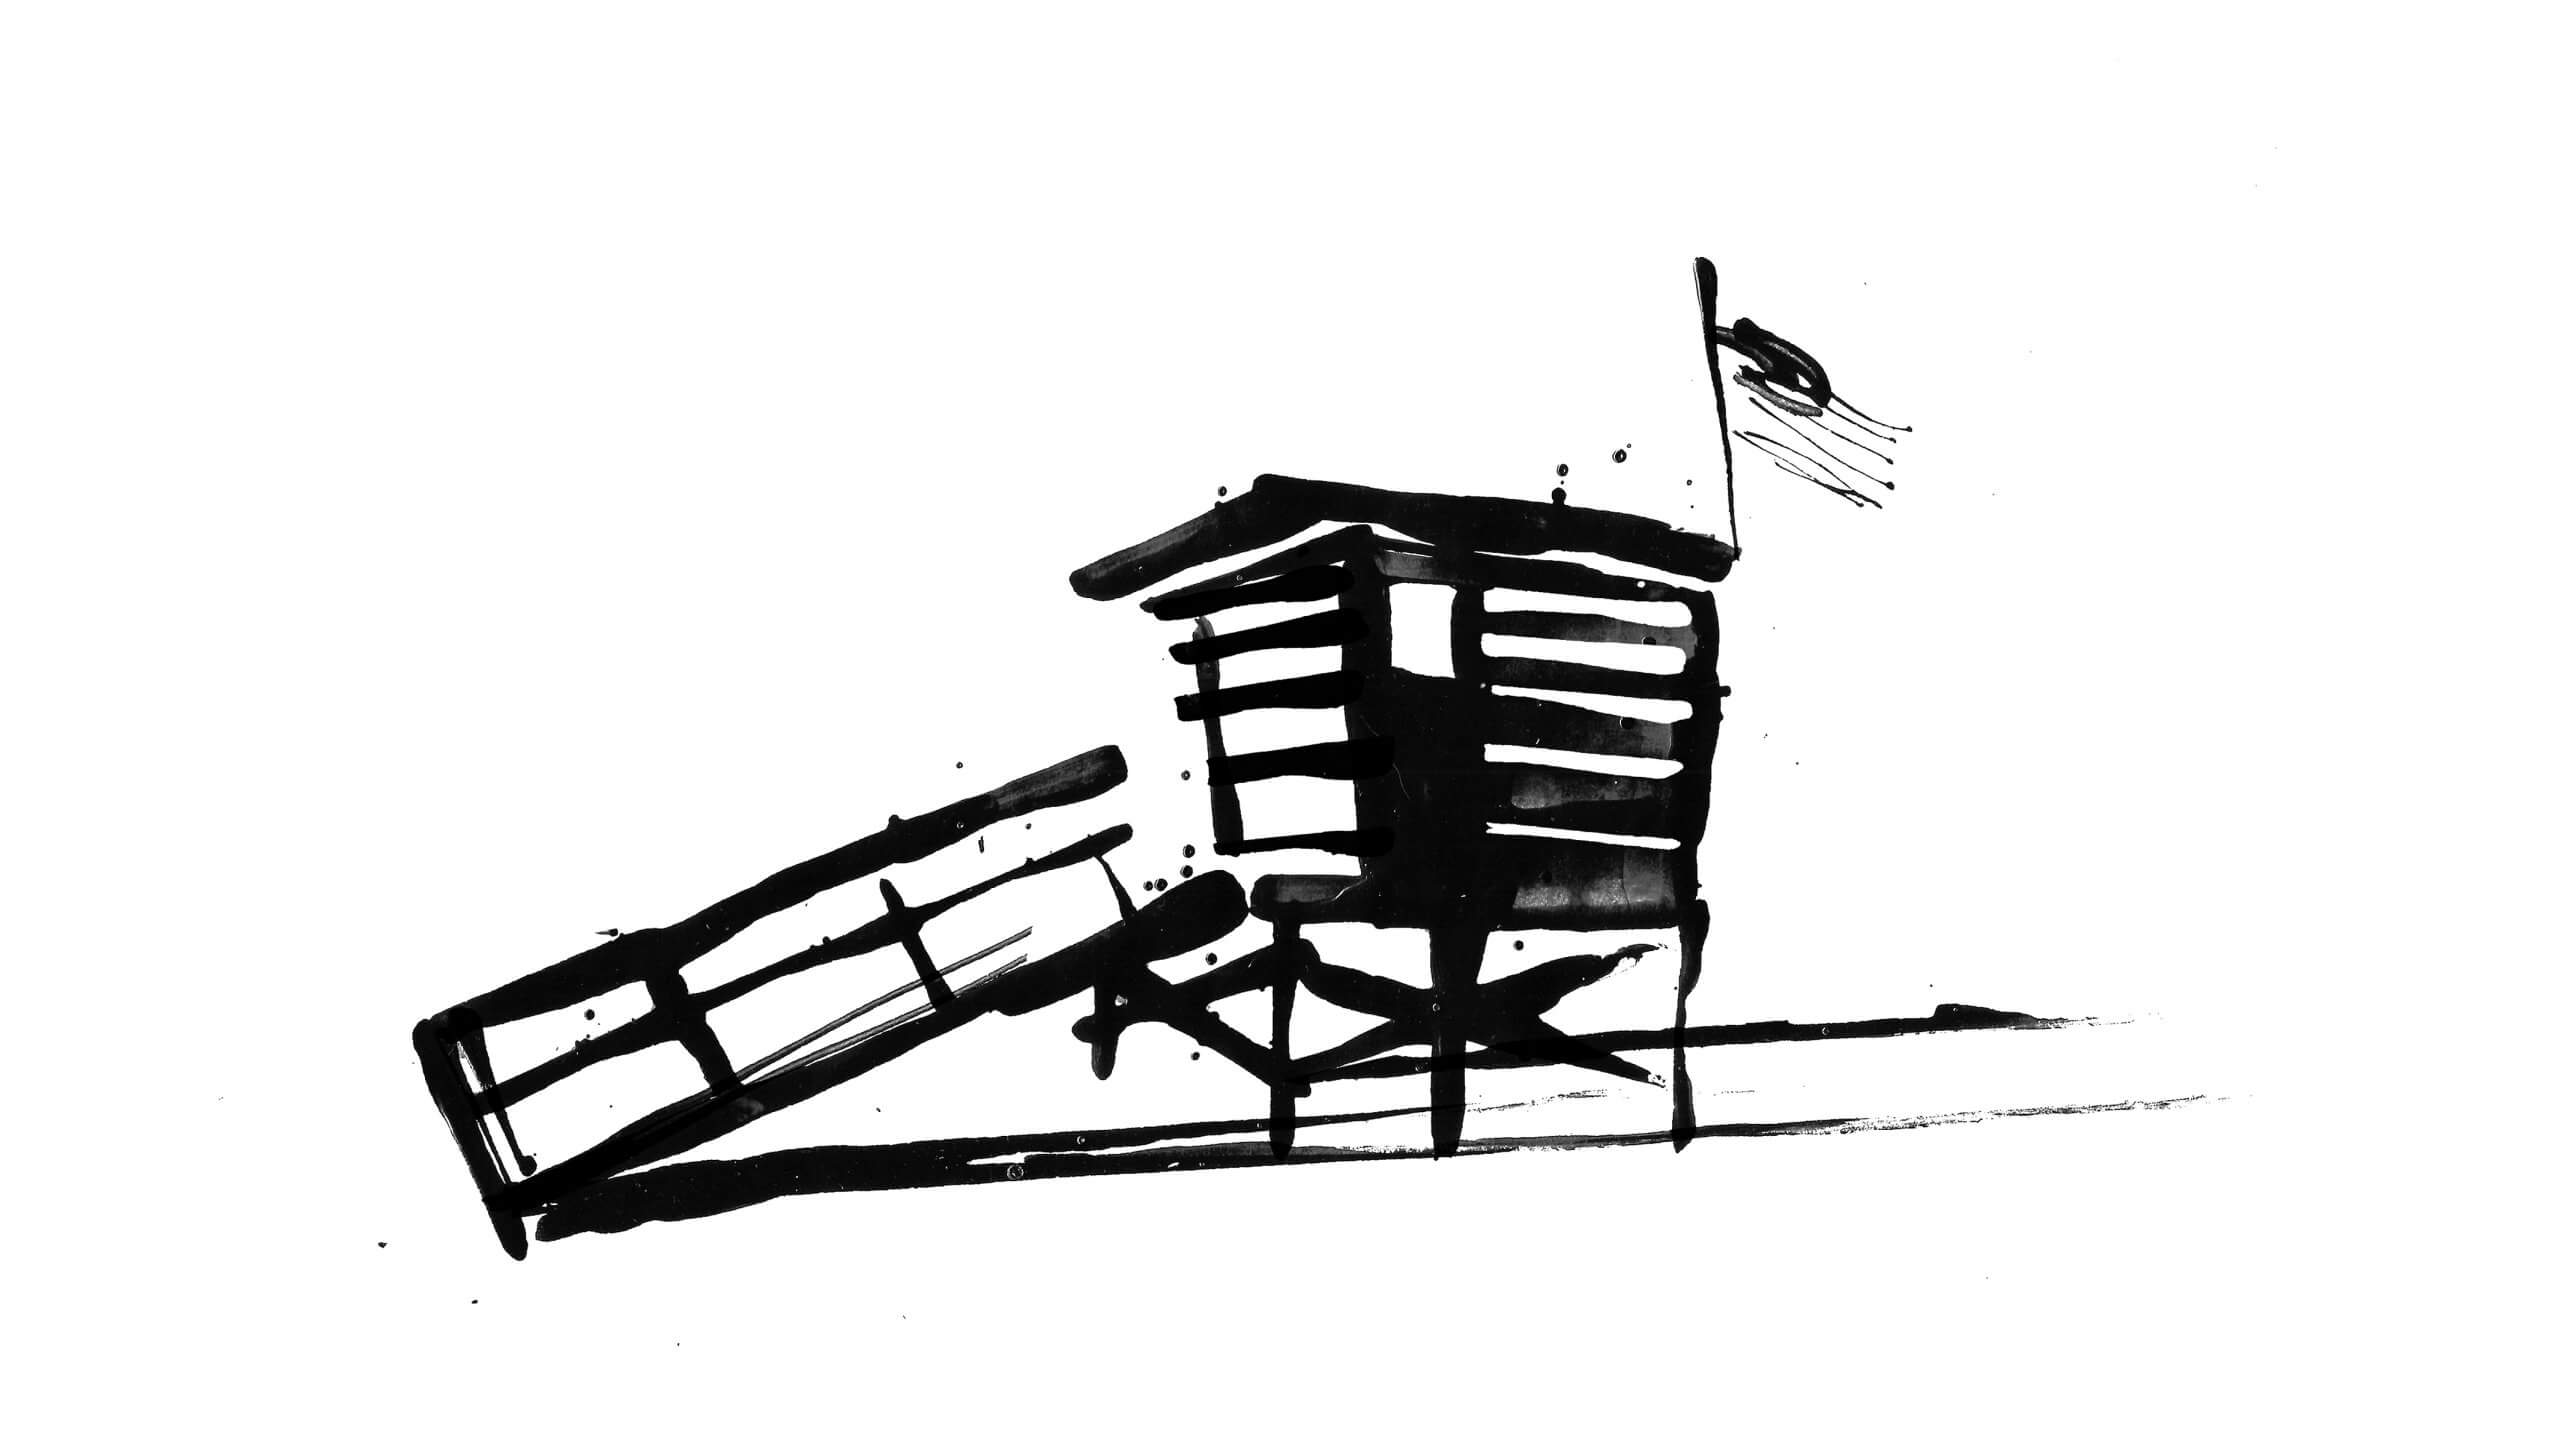 illustration of lifeguard station in Malibu in California, simple inky line drawing. Taken from an illustrated map of the State of California.